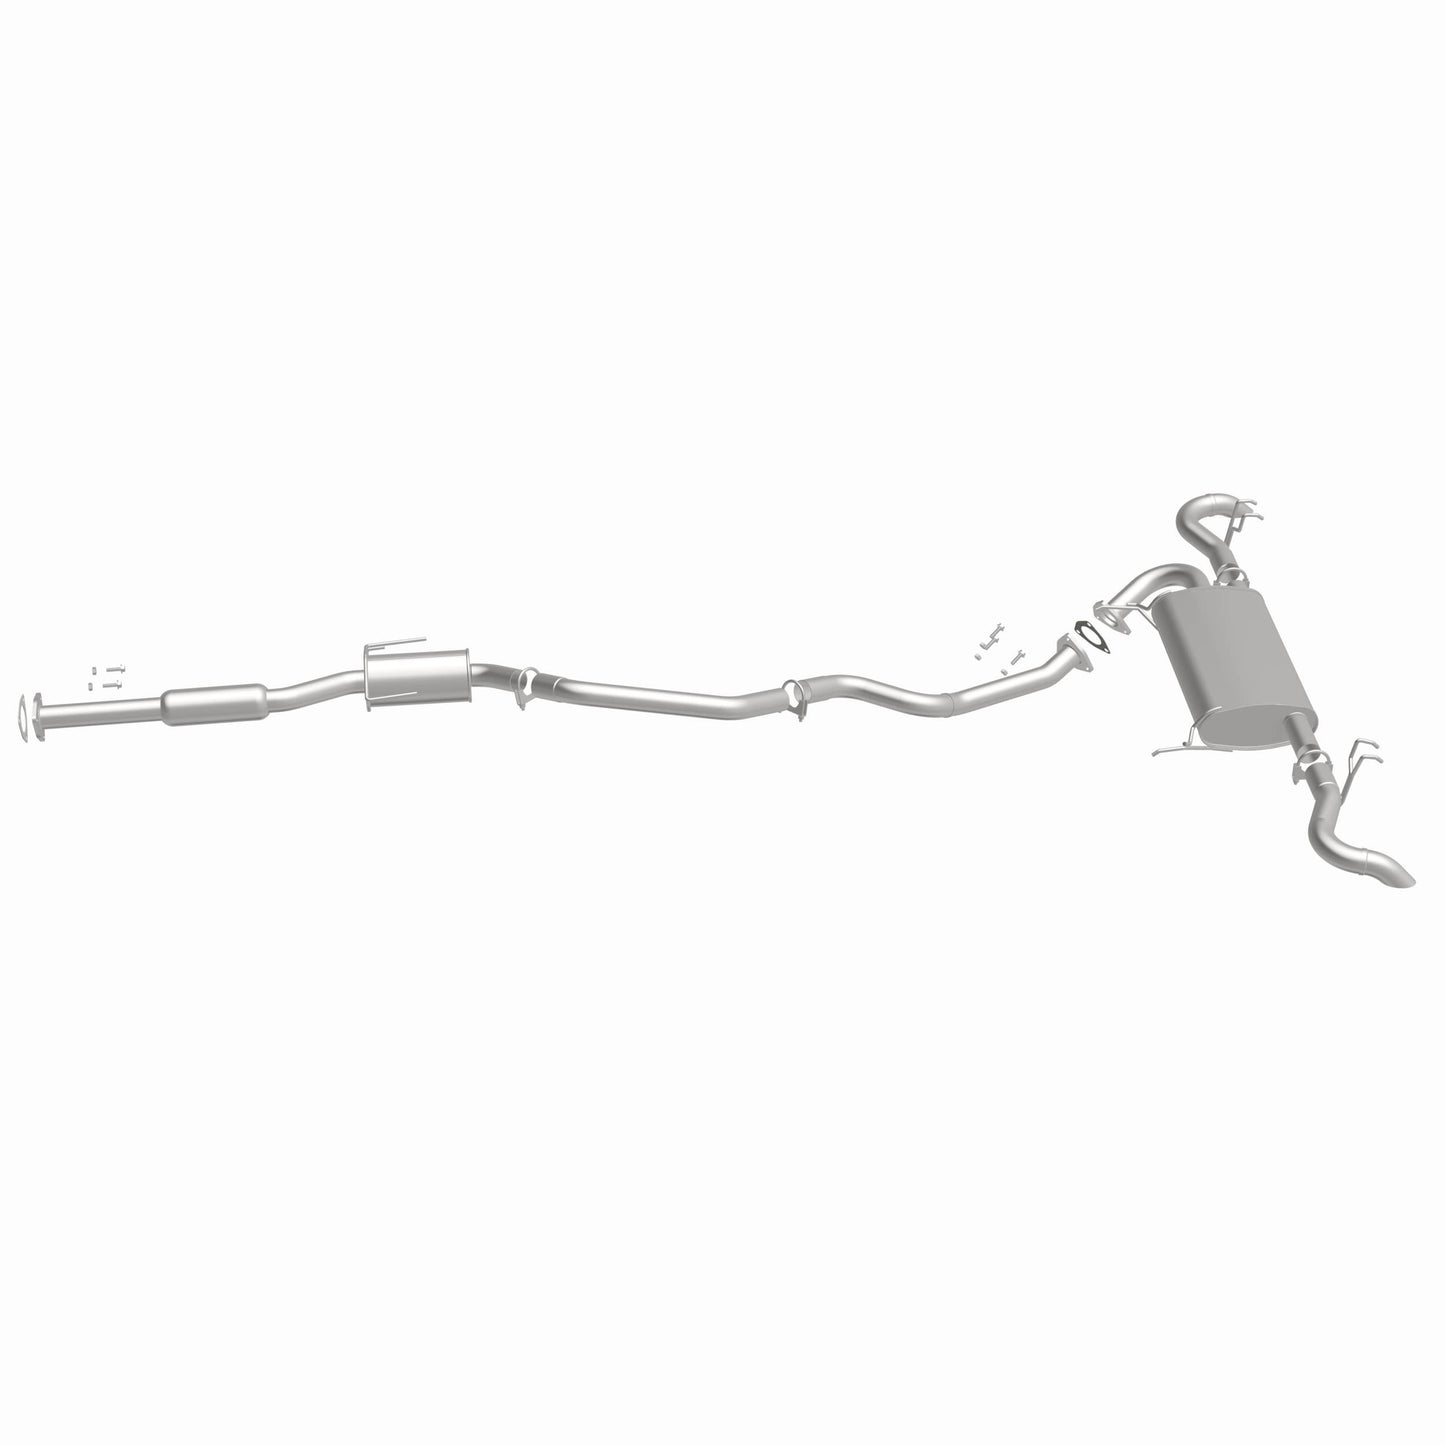 Fits 2013-2017 Acura RDX 3.5L Direct-Fit Replacement Exhaust System 106-0812